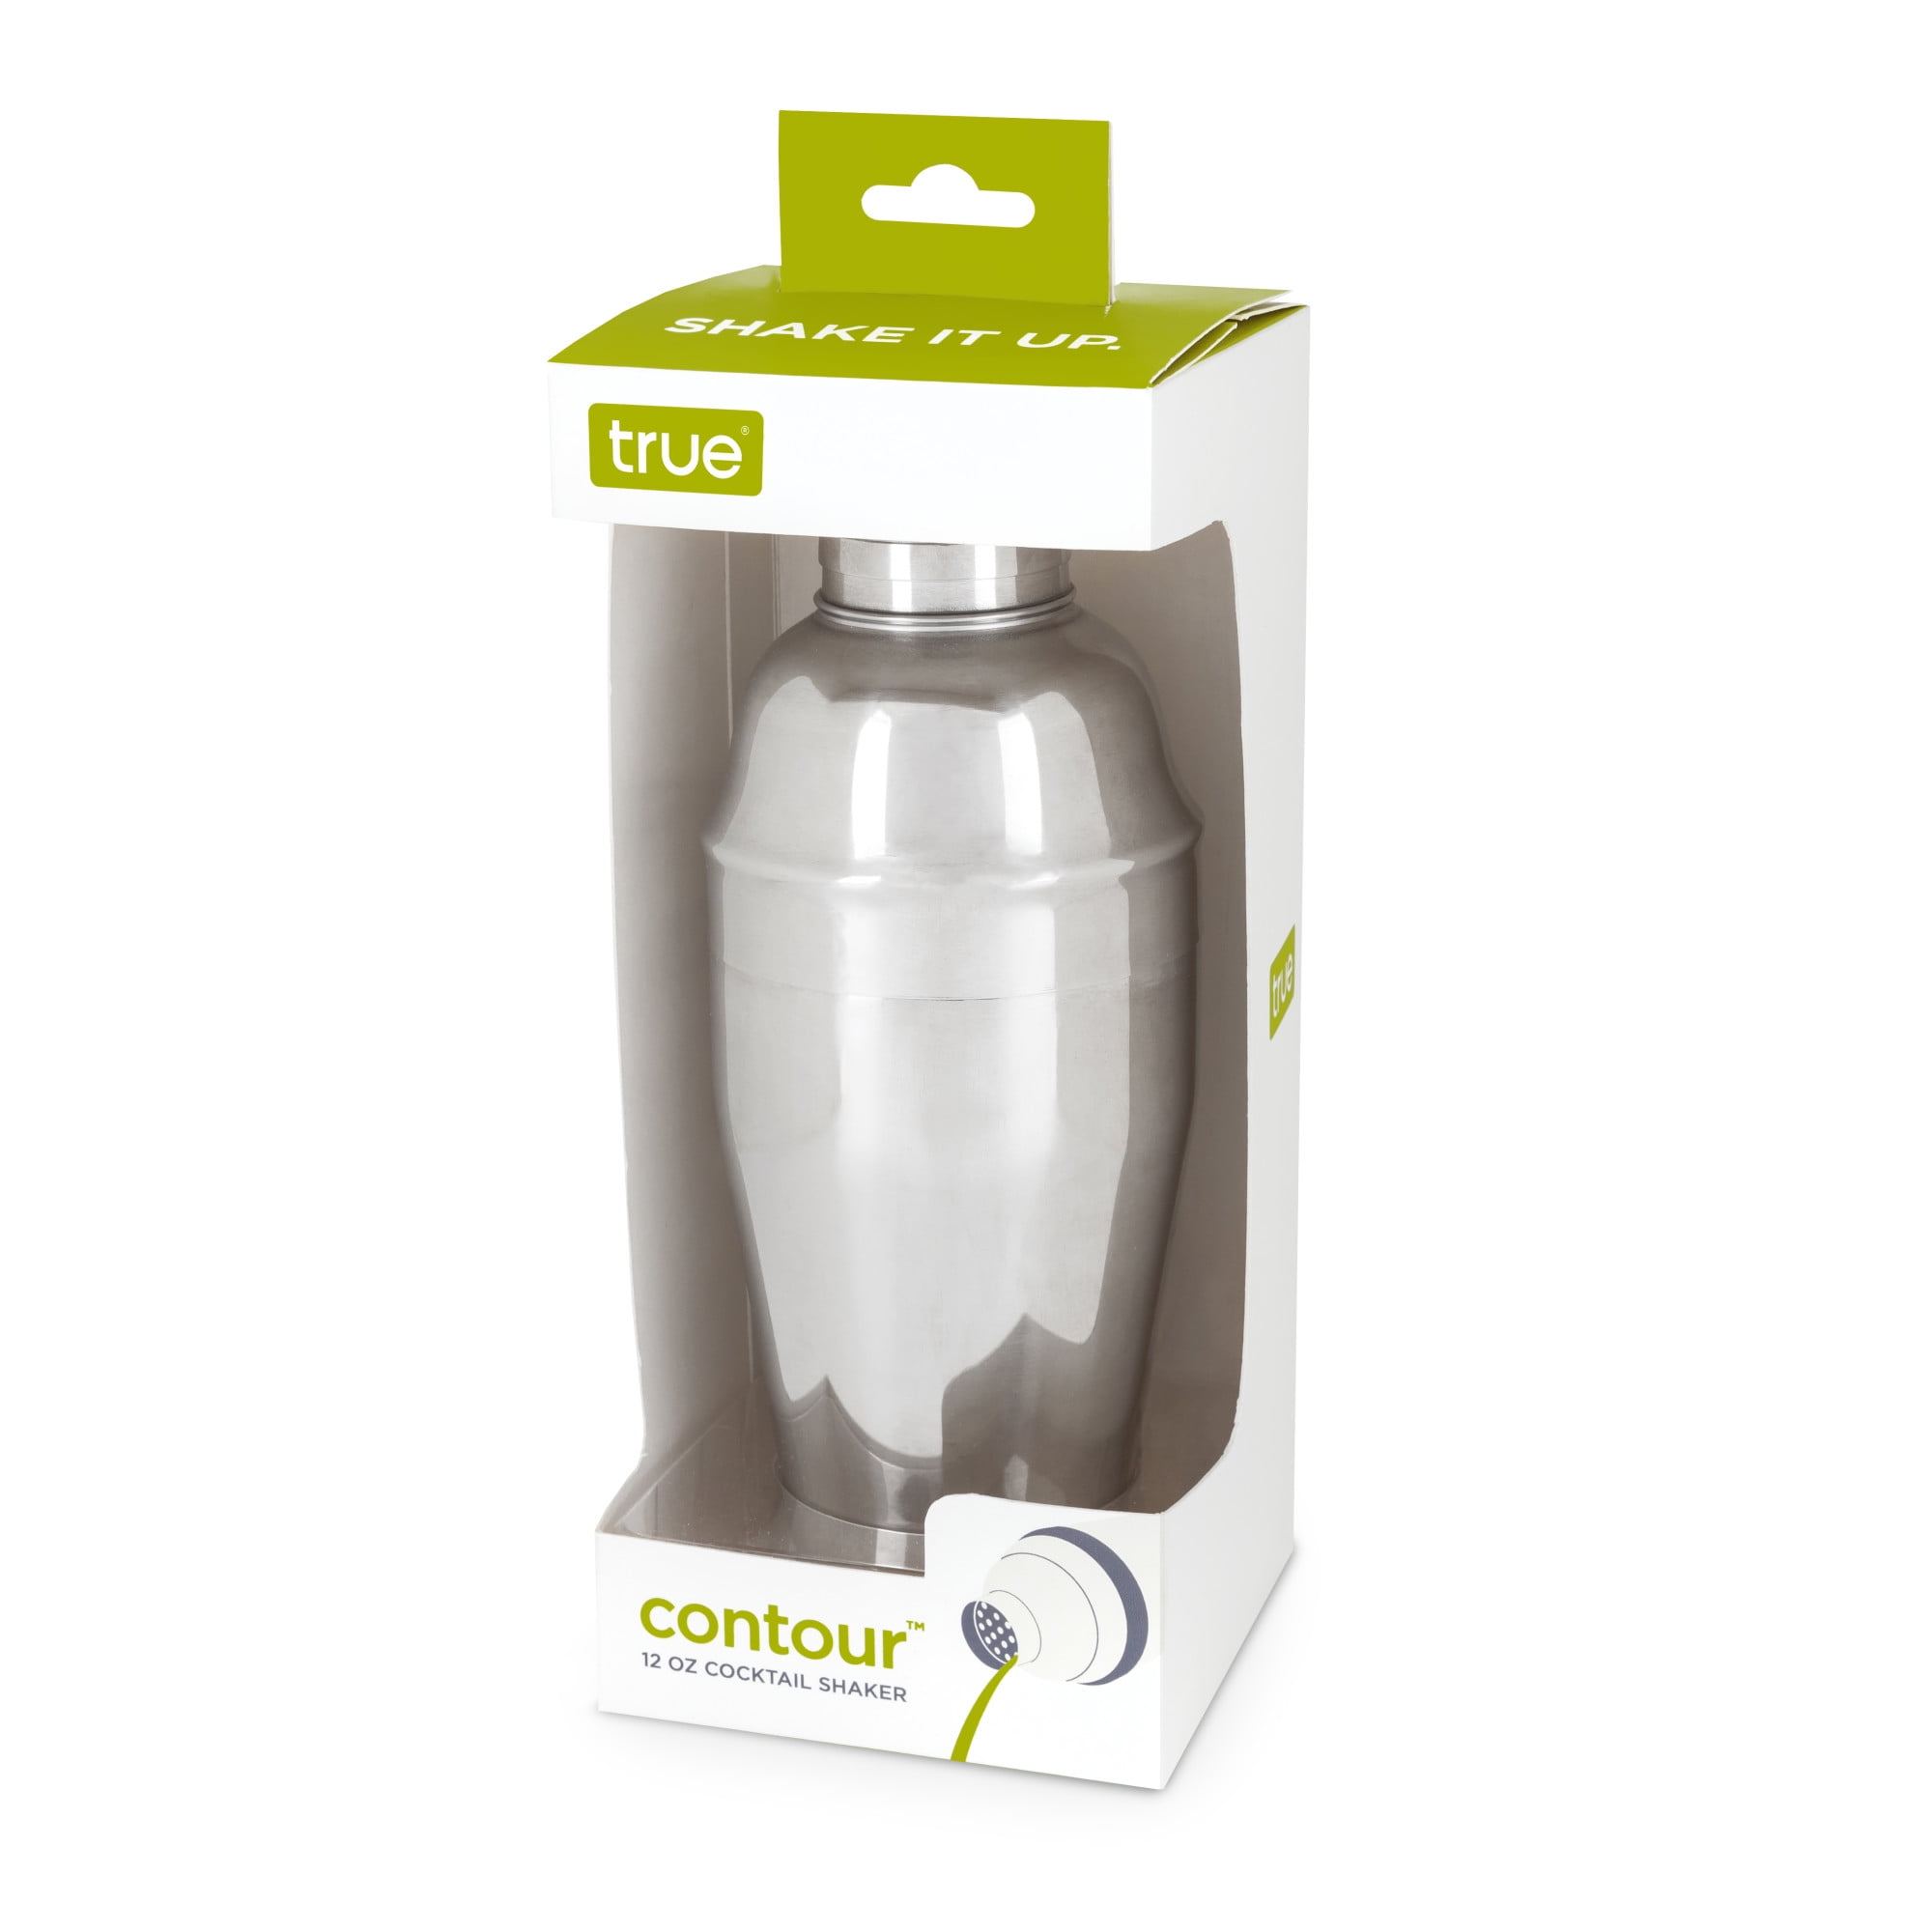 True Contour Cocktail Shaker, 8.5 oz Stainless Steel Cobbler Shaker With  Cap And Strainer - Drink Shakers for Cocktails and Liquor 